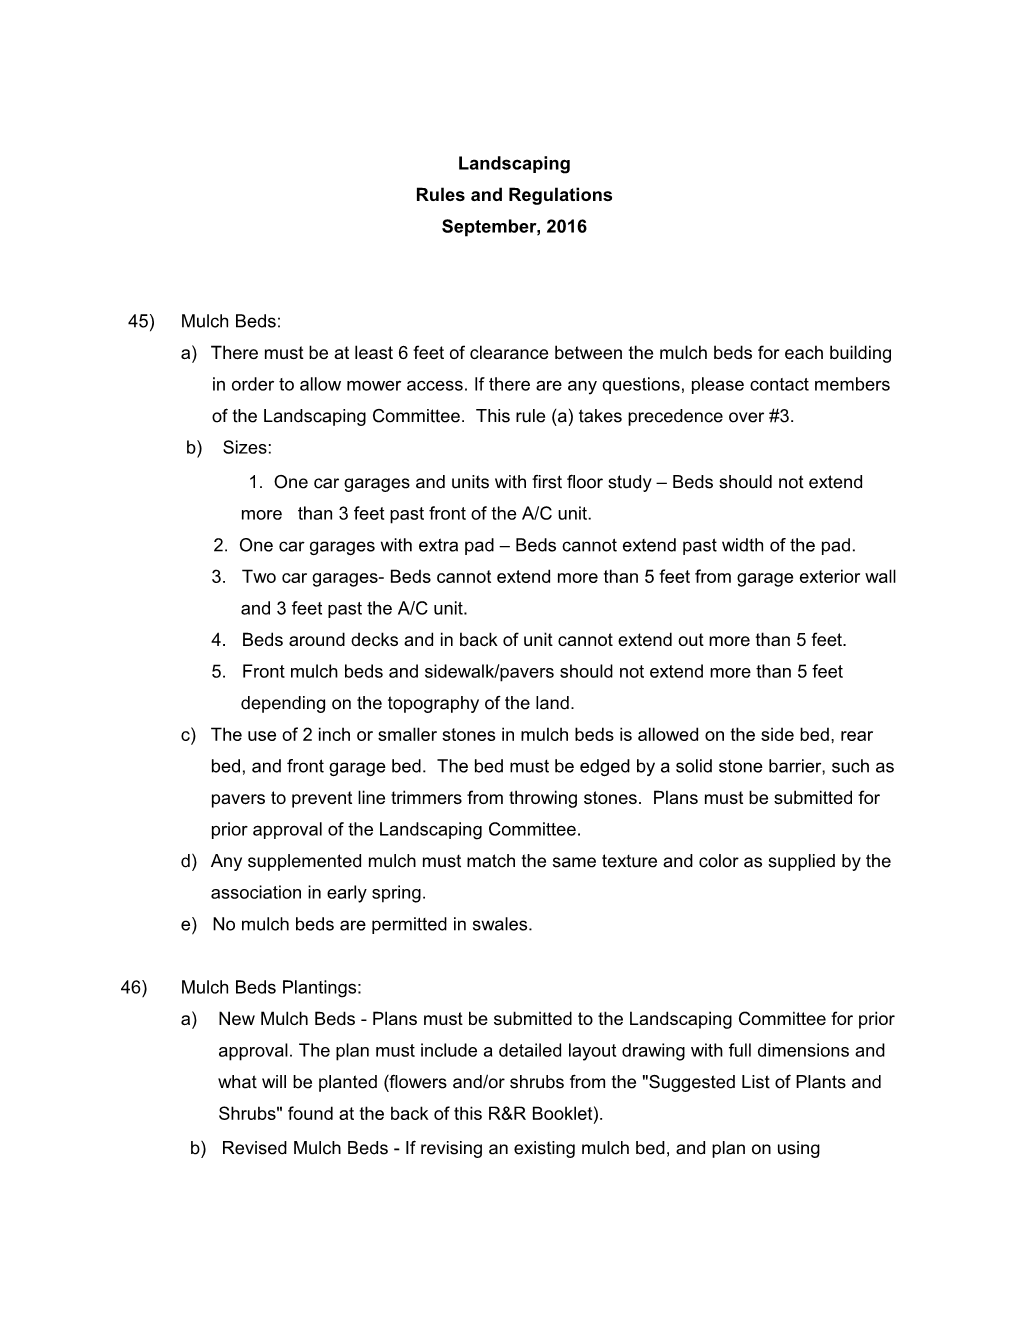 Rules and Regulations s10